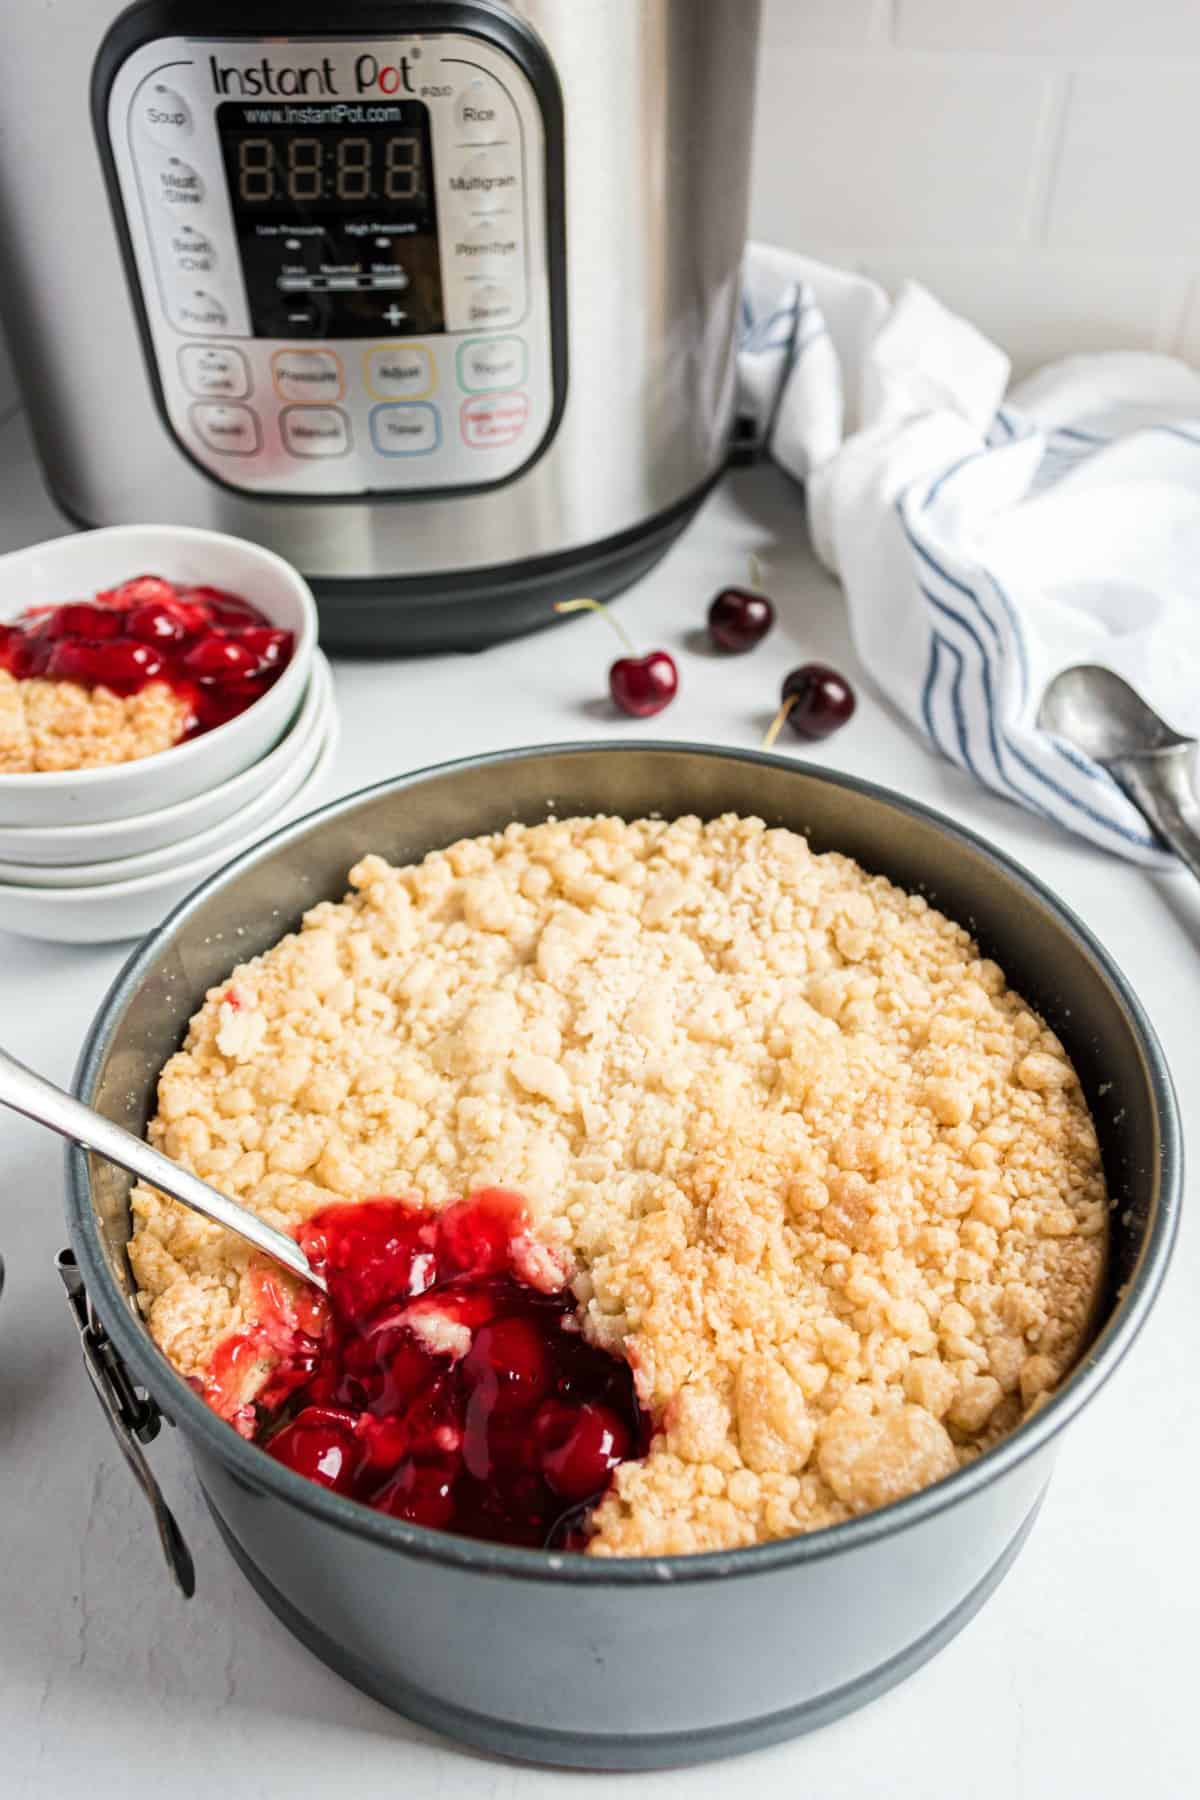 Cherry cobbler in a springform pan with one scoop missing and instant pot in background.